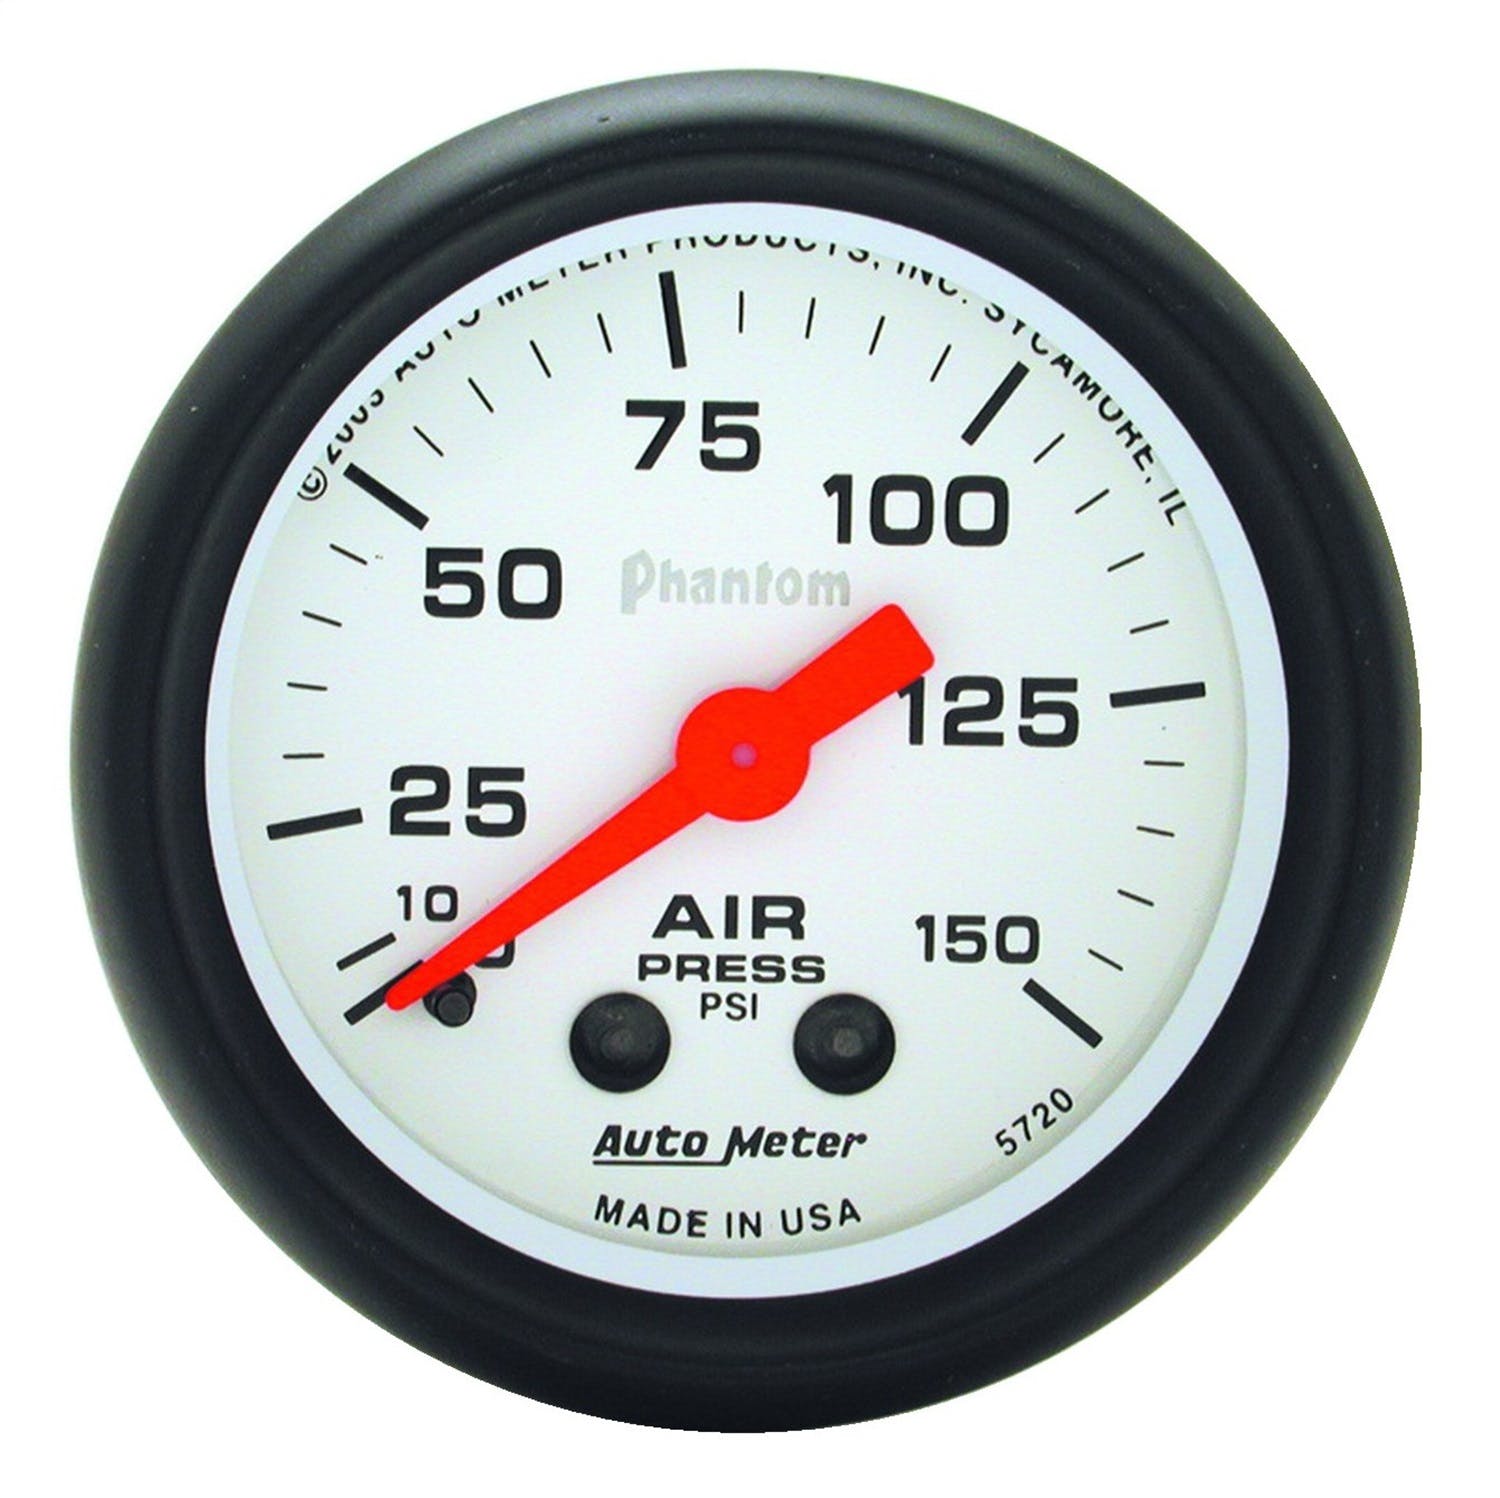 AutoMeter Products 5720 Air Pressure 0-150 PSI